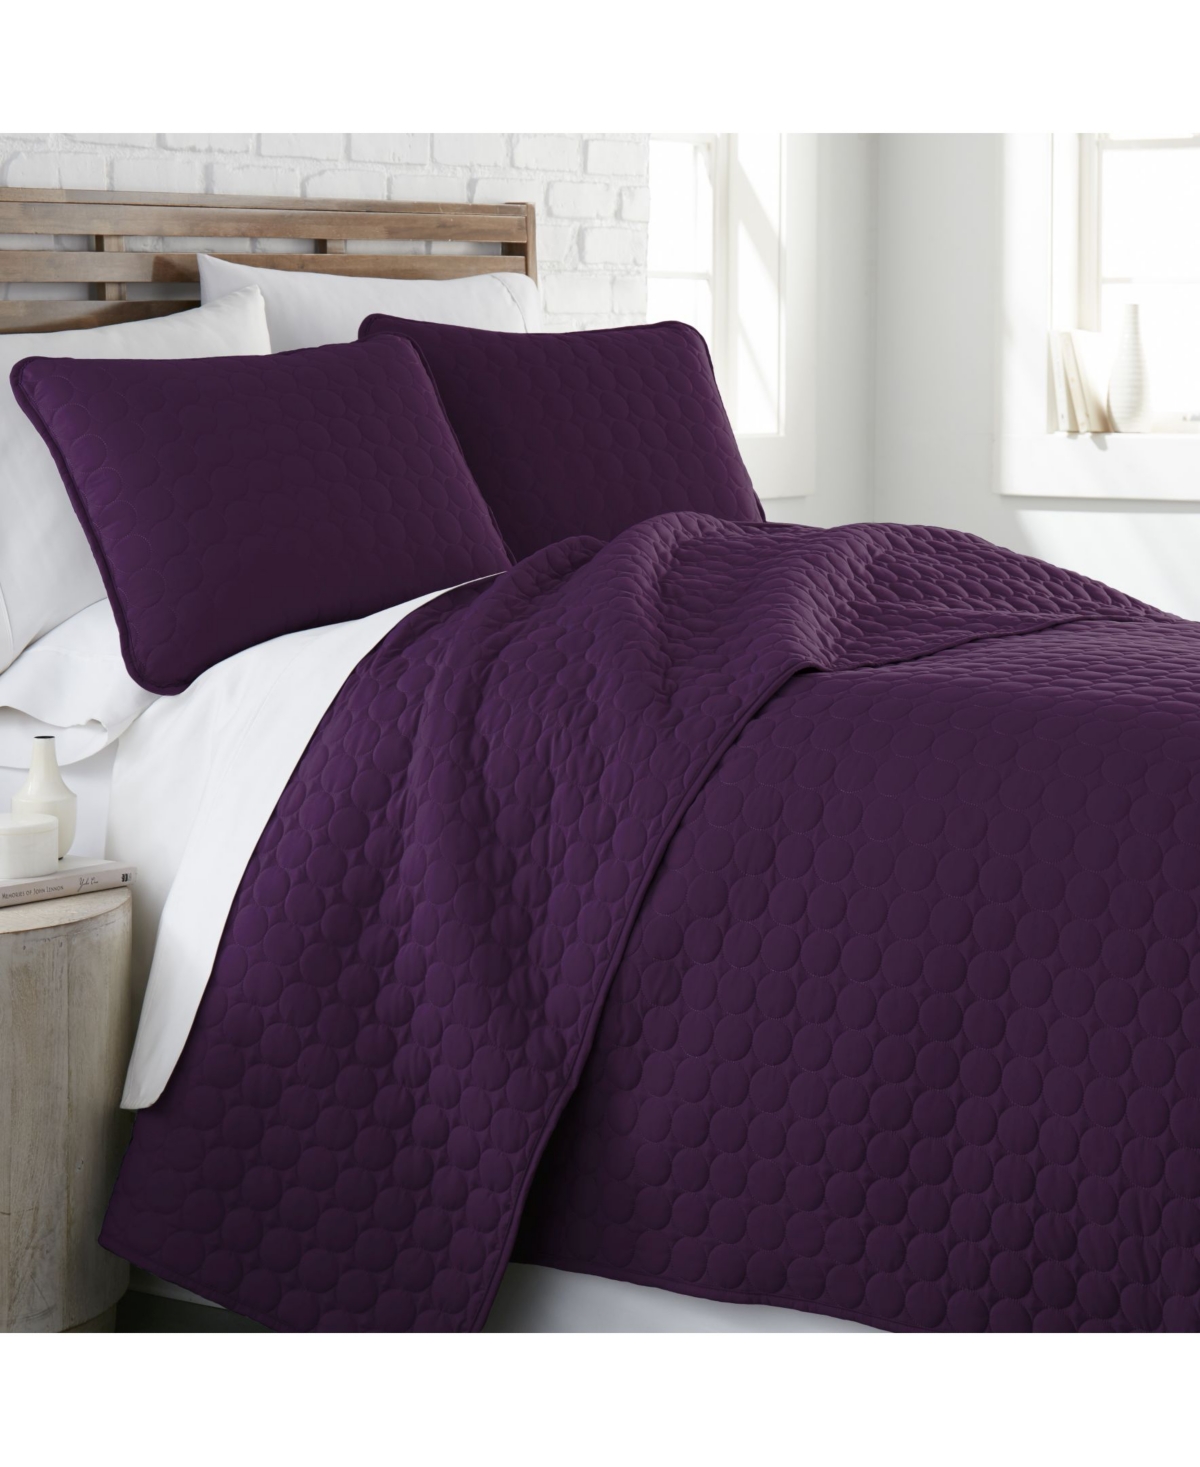 Southshore Fine Linens Ultra-soft Lightweight 3-piece Quilt And Sham Set, Twin/twin Xl In Purple